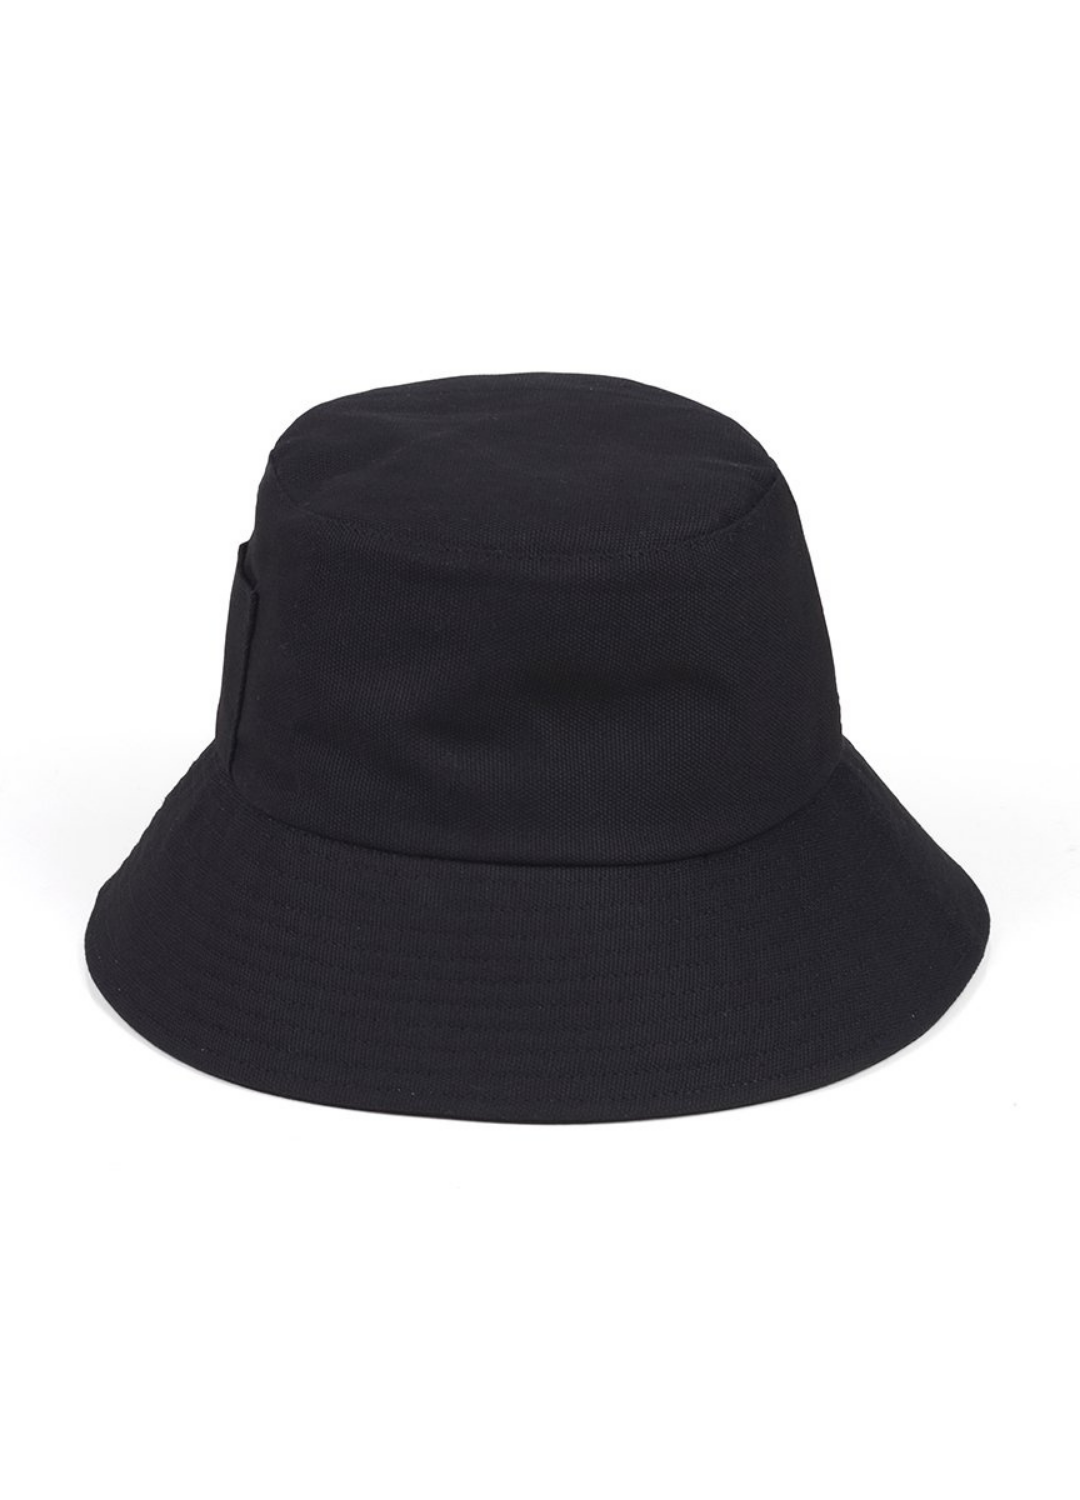 The Wave Bucket in Black Canvas